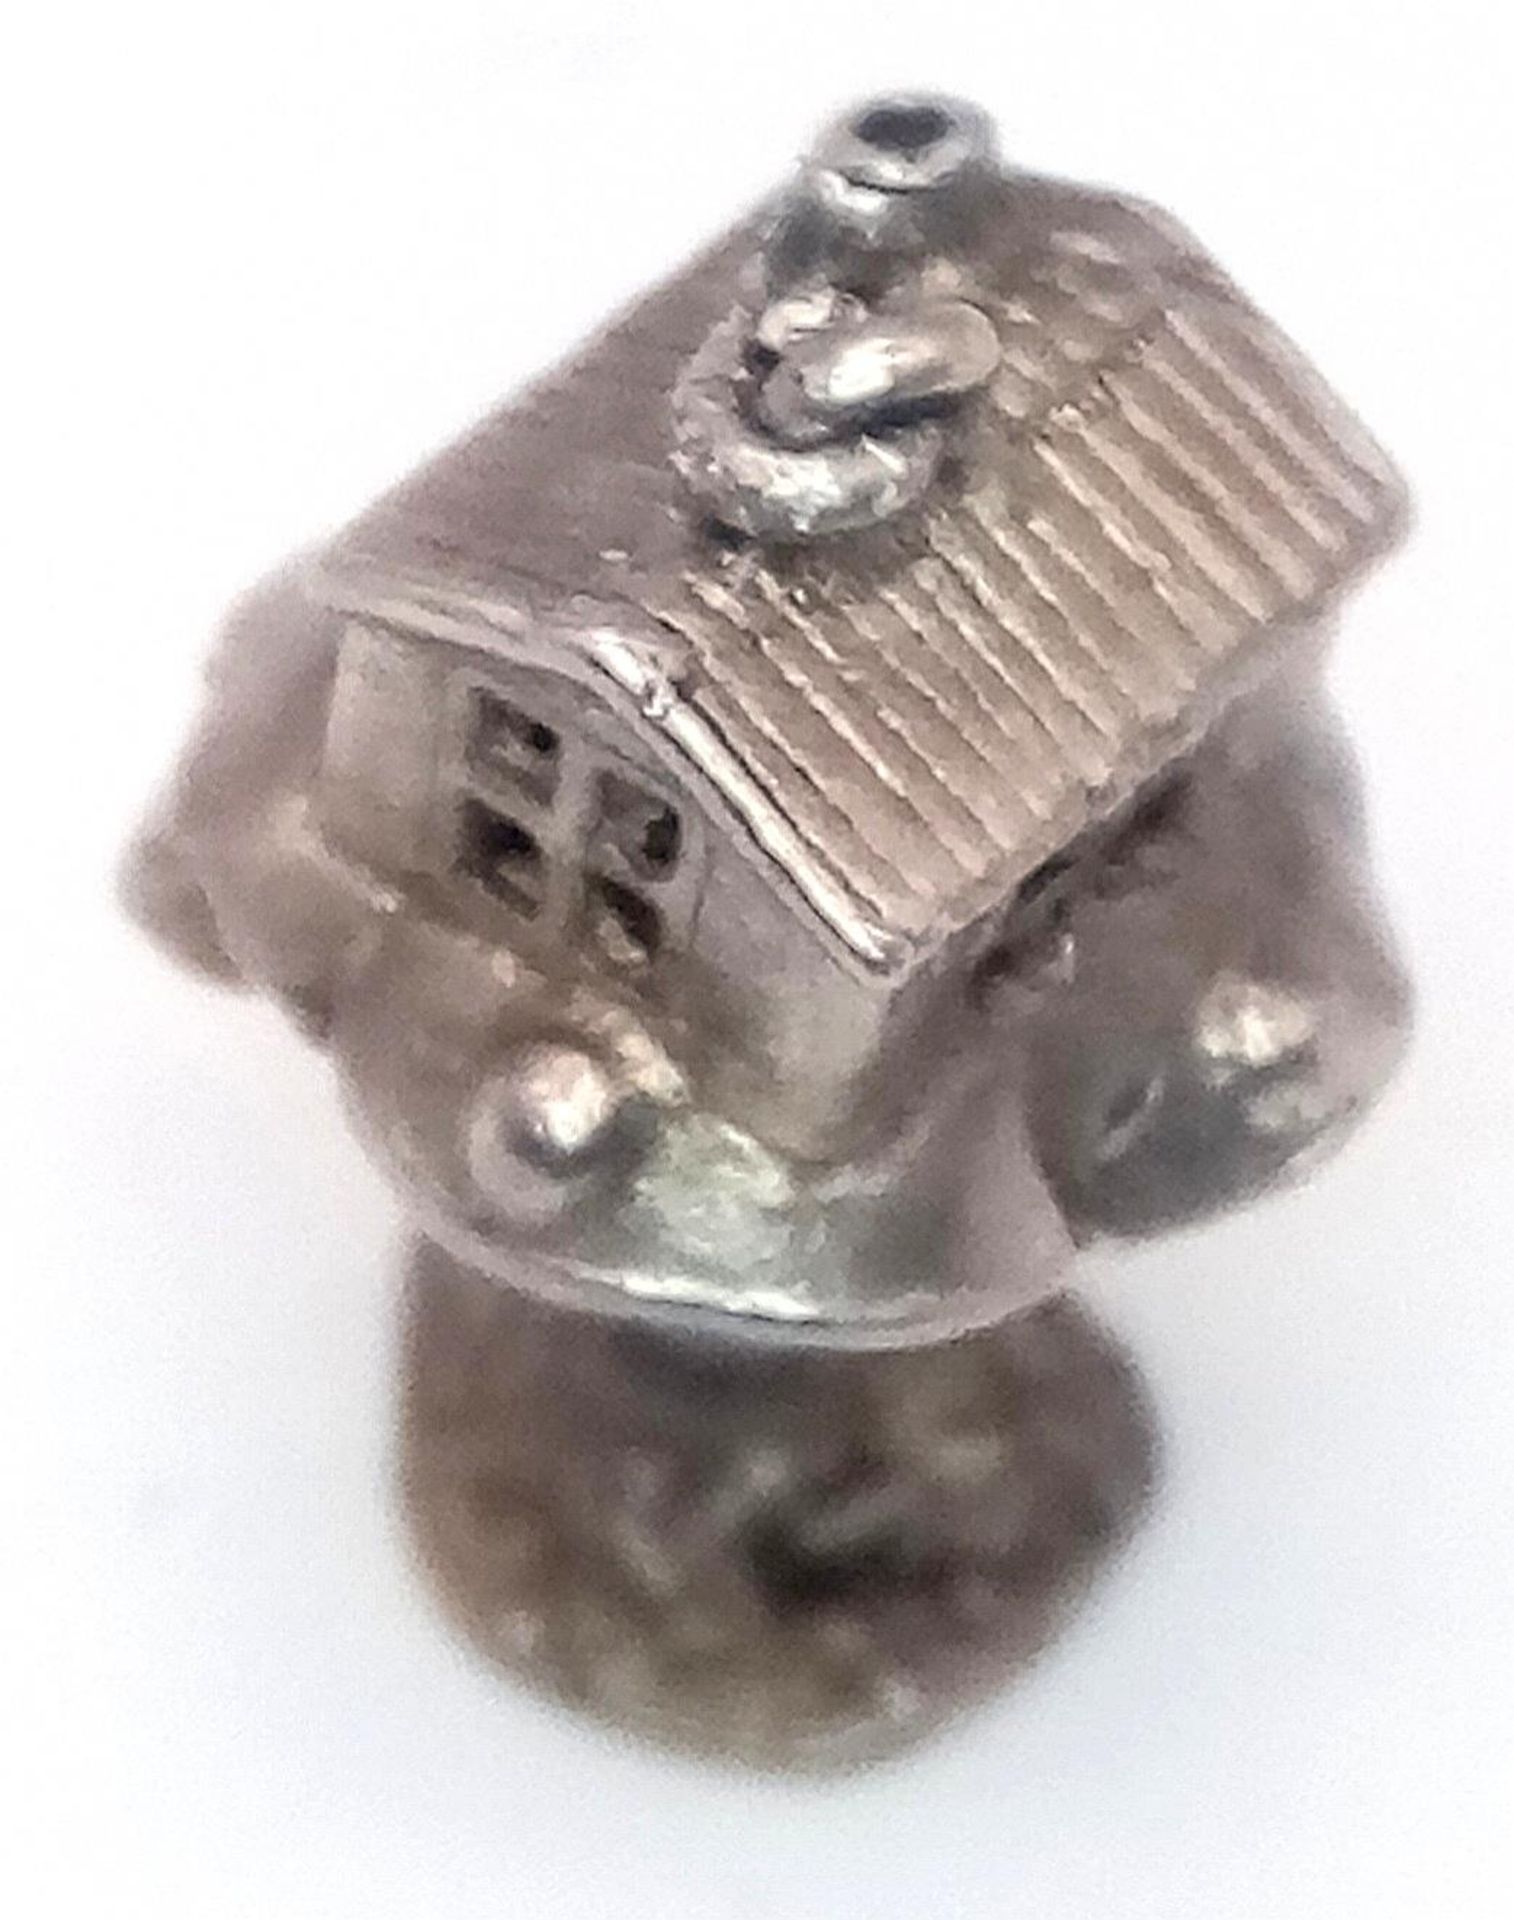 A VINTAGE STERLING SILVER TREE HOUSE CHARM, WHICH OPENS TO REVEAL A WIZARD INSIDE, WEIGHT 4G - Image 6 of 8